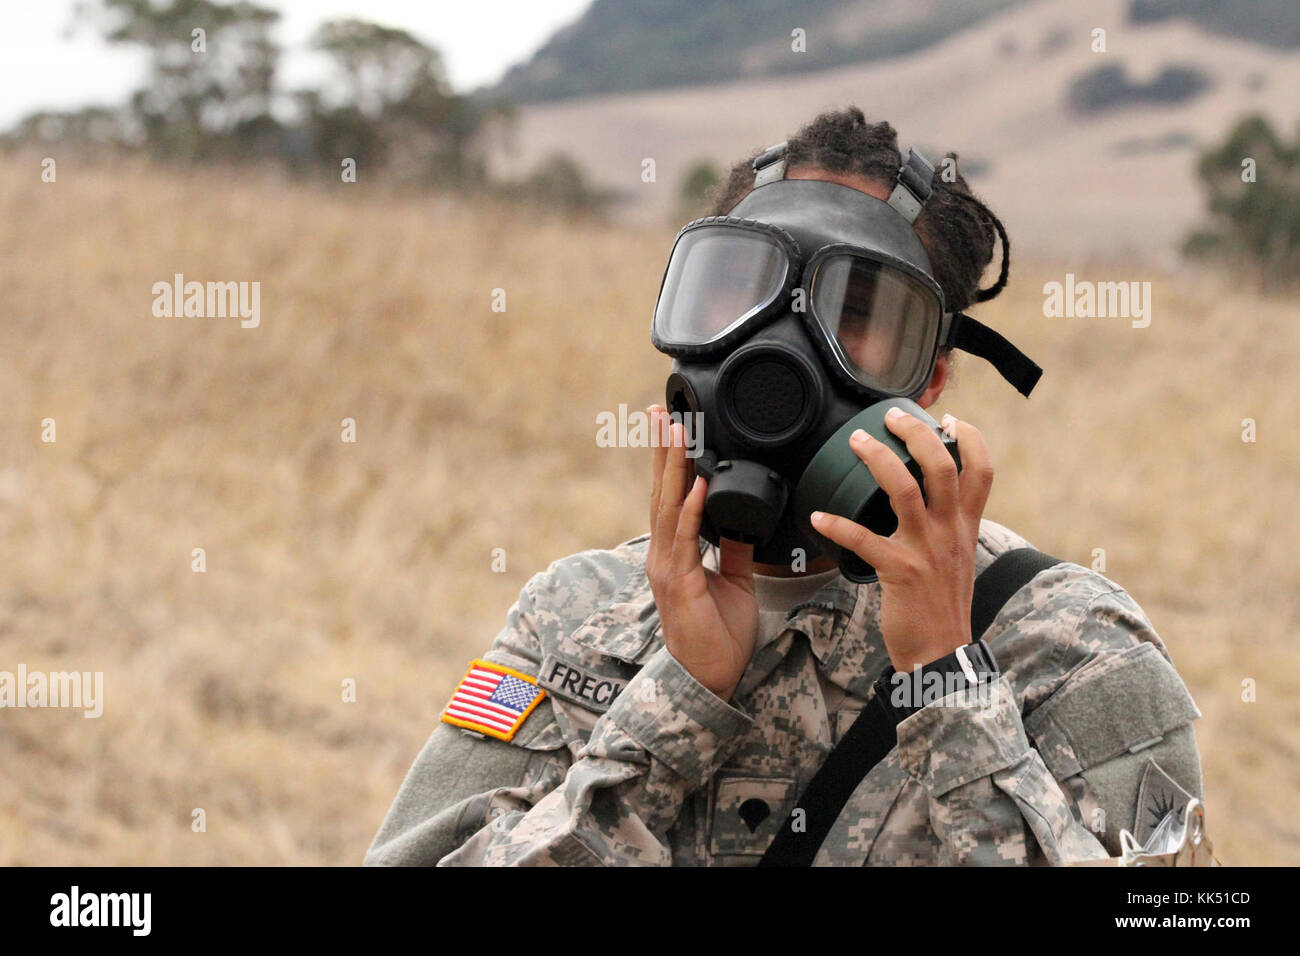 Spc. Emefa Freckleton adjust her protective mask prior to entering a gas chamber Nov. 8 during the California Army National Guard's 2017-18 Best Warrior Competition at Camp San Luis Obispo, California. This was one of the last tests after four competitive days to find California’s Best of the Best. (Army National Guard photo by Staff Sgt. Eddie Siguenza) Stock Photo